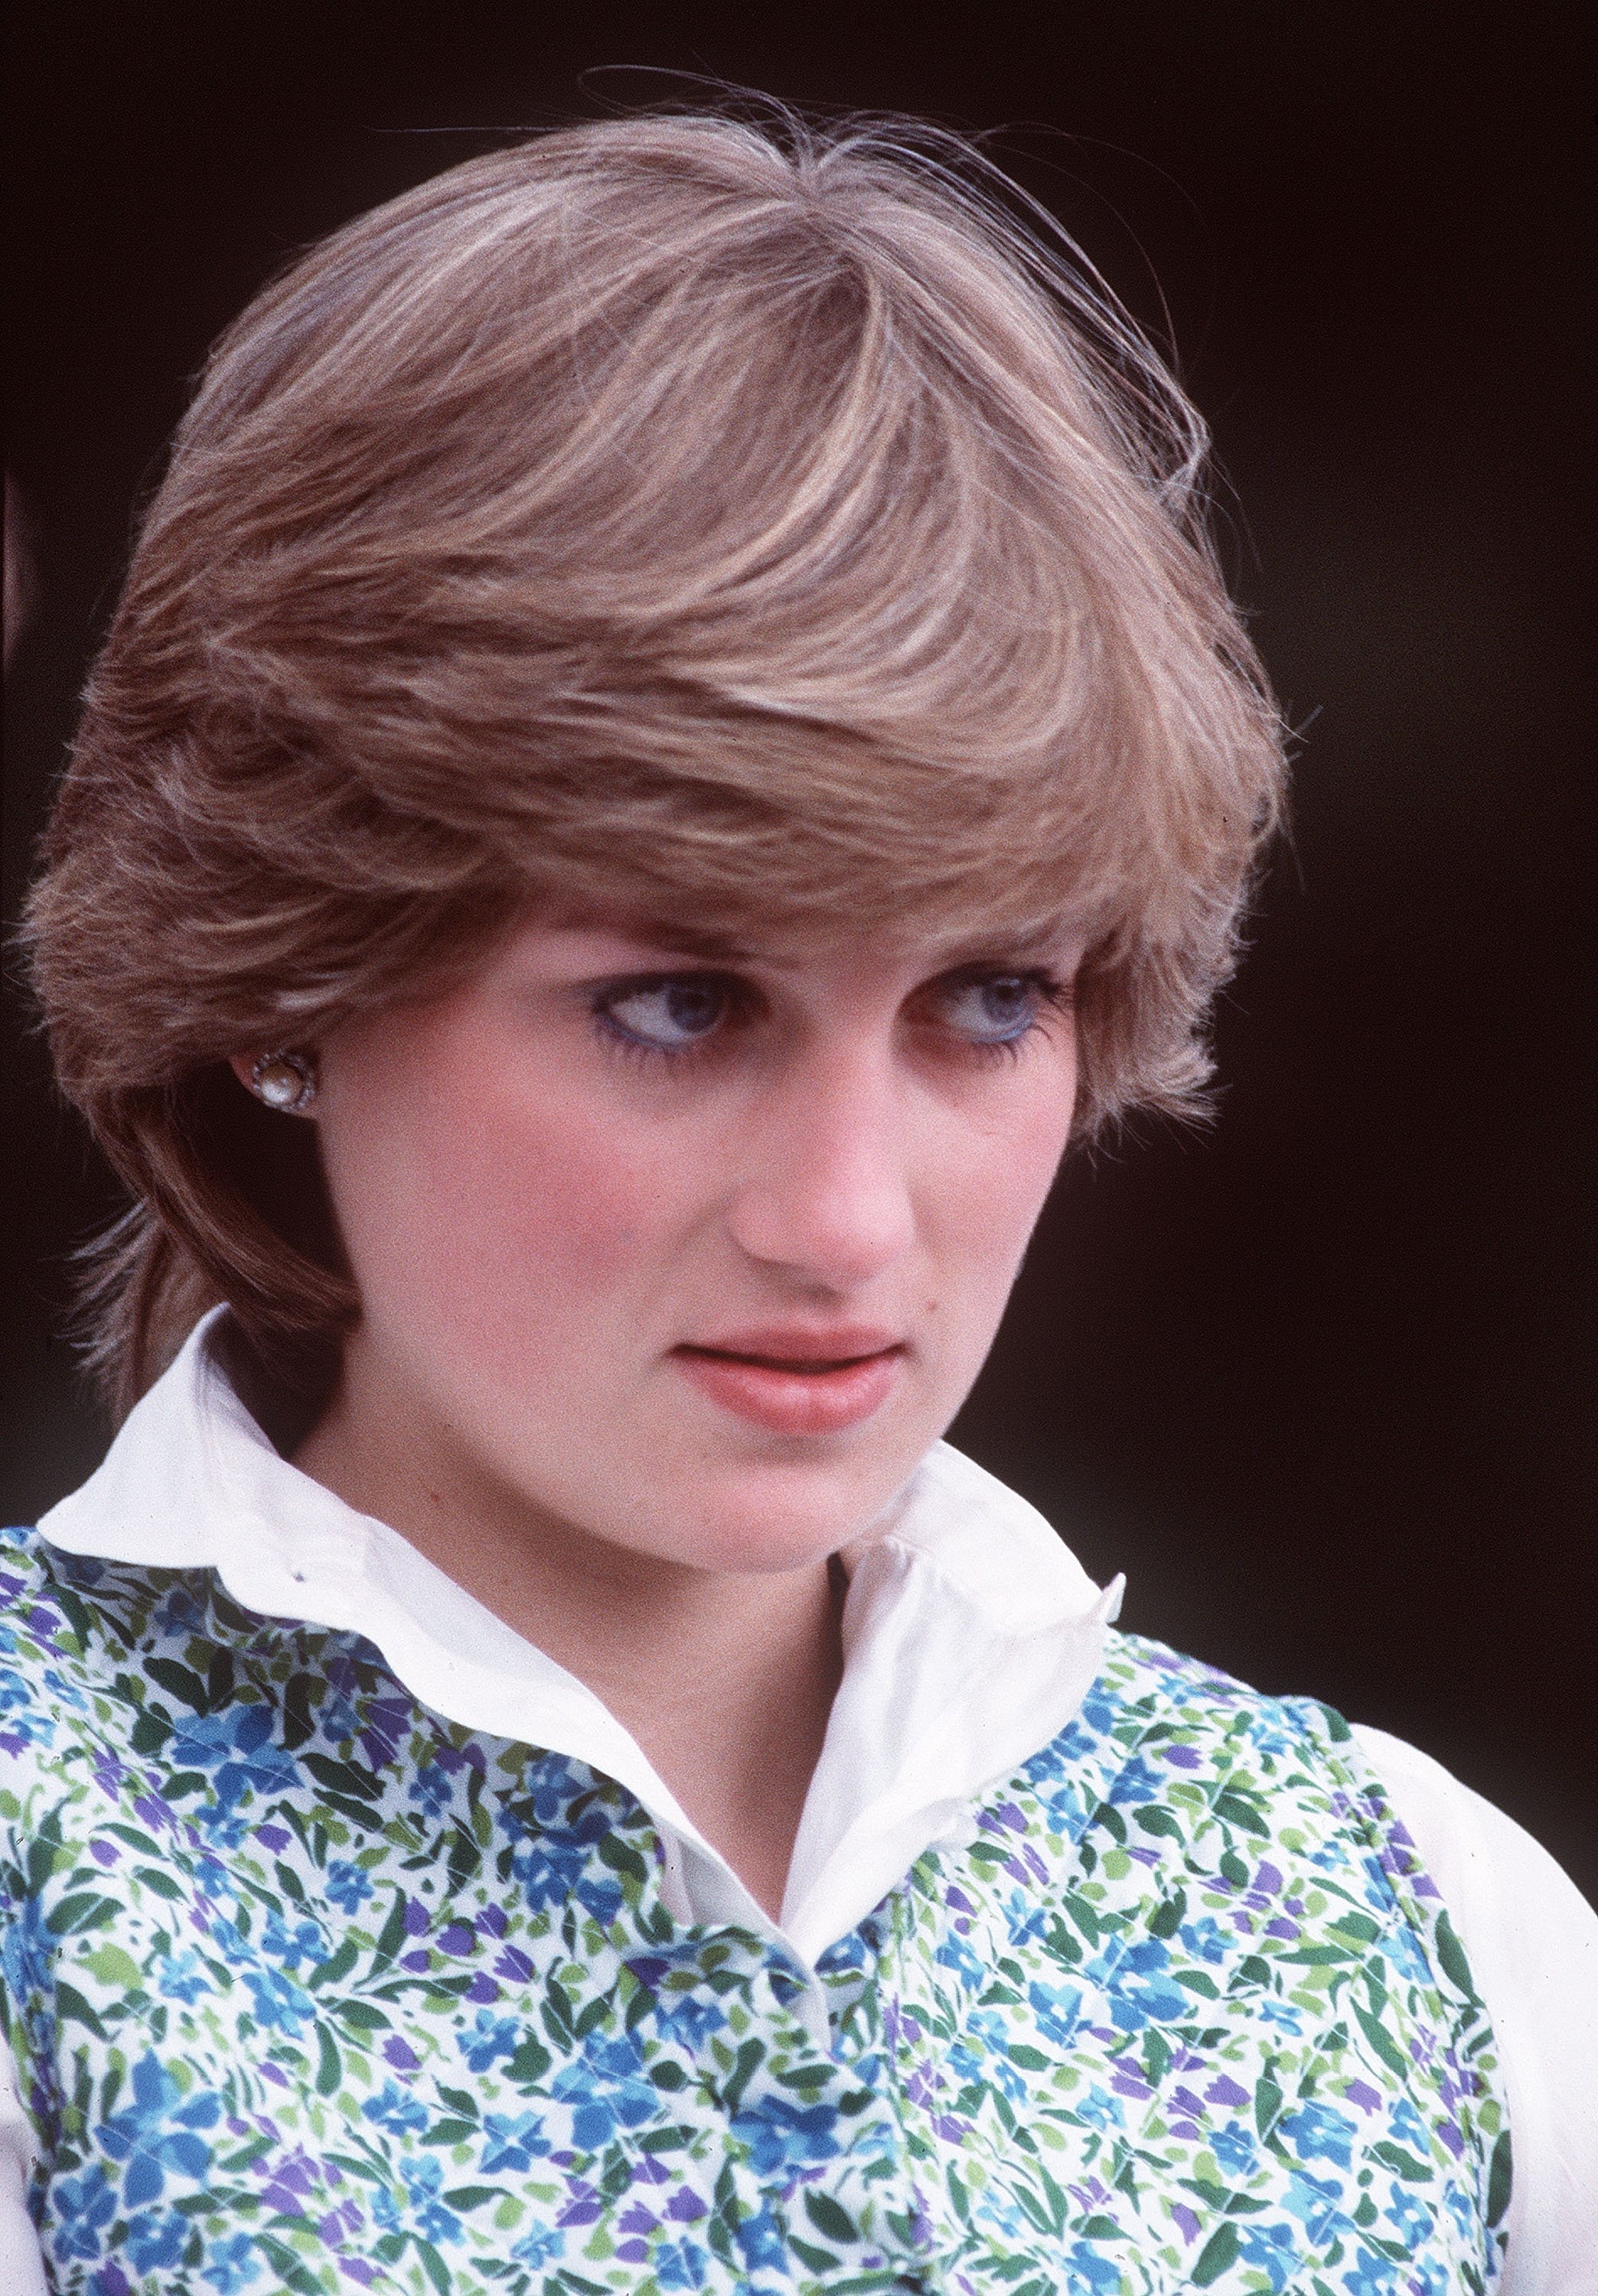 Princess Diana during a polo match before she married Prince Charles in 1981. | Source: Getty Images